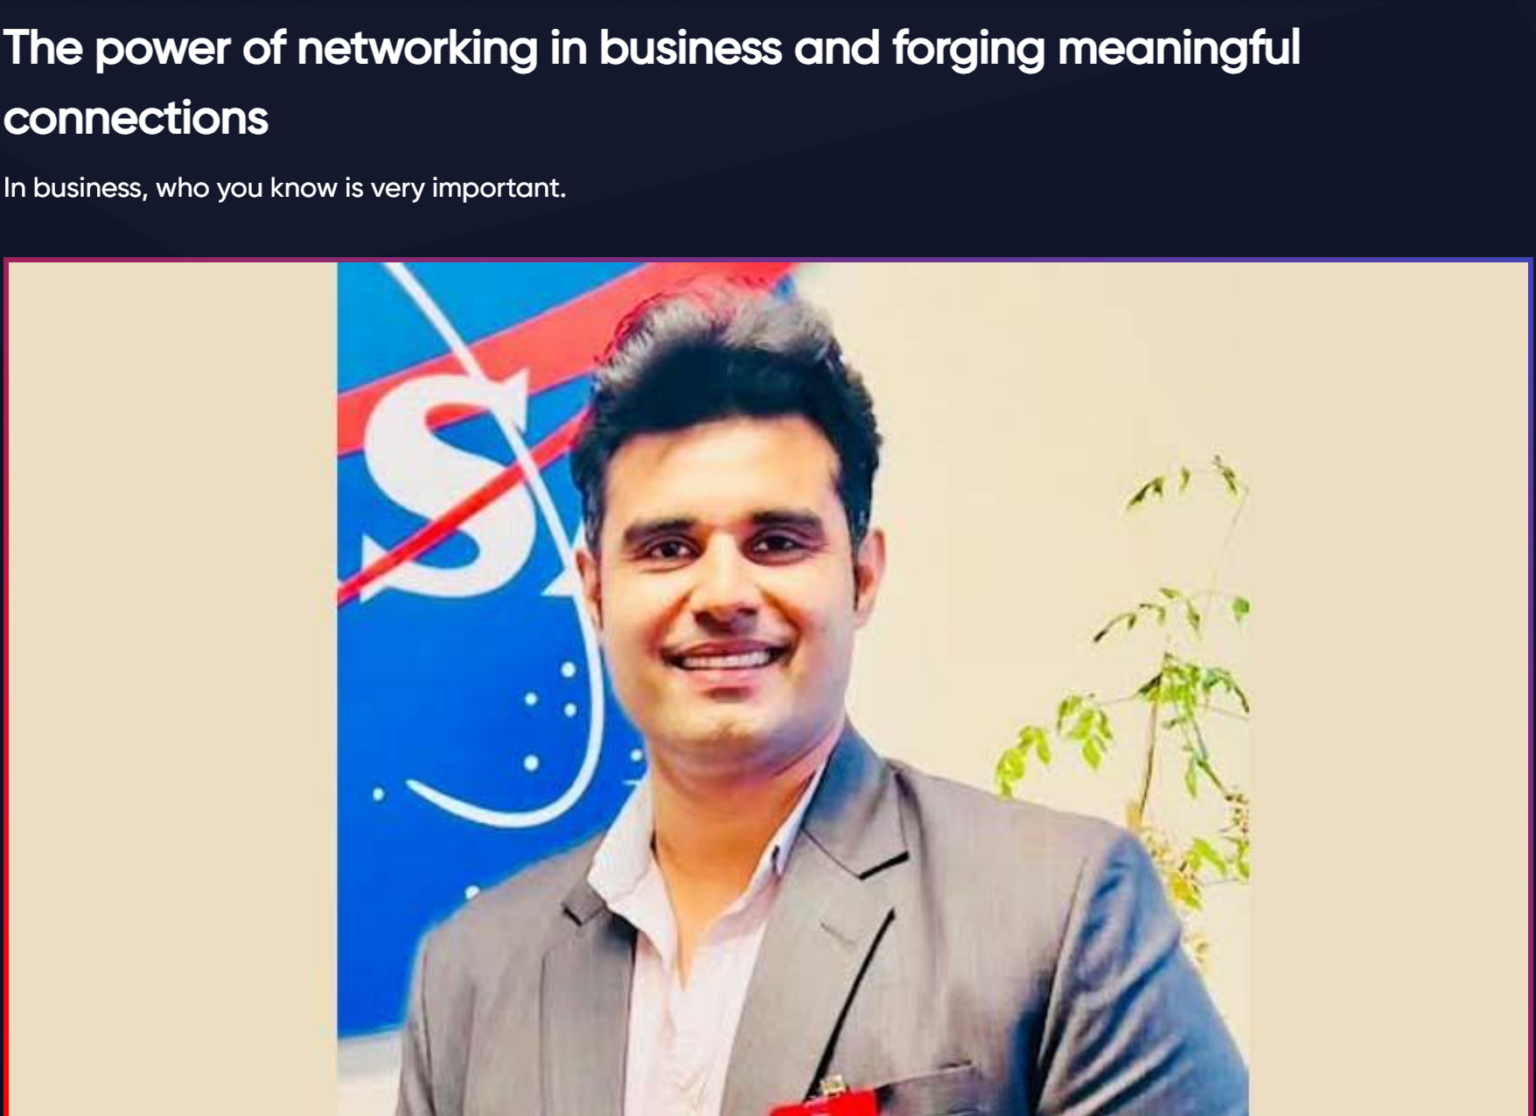 The power of networking in business and forging meaningful connections